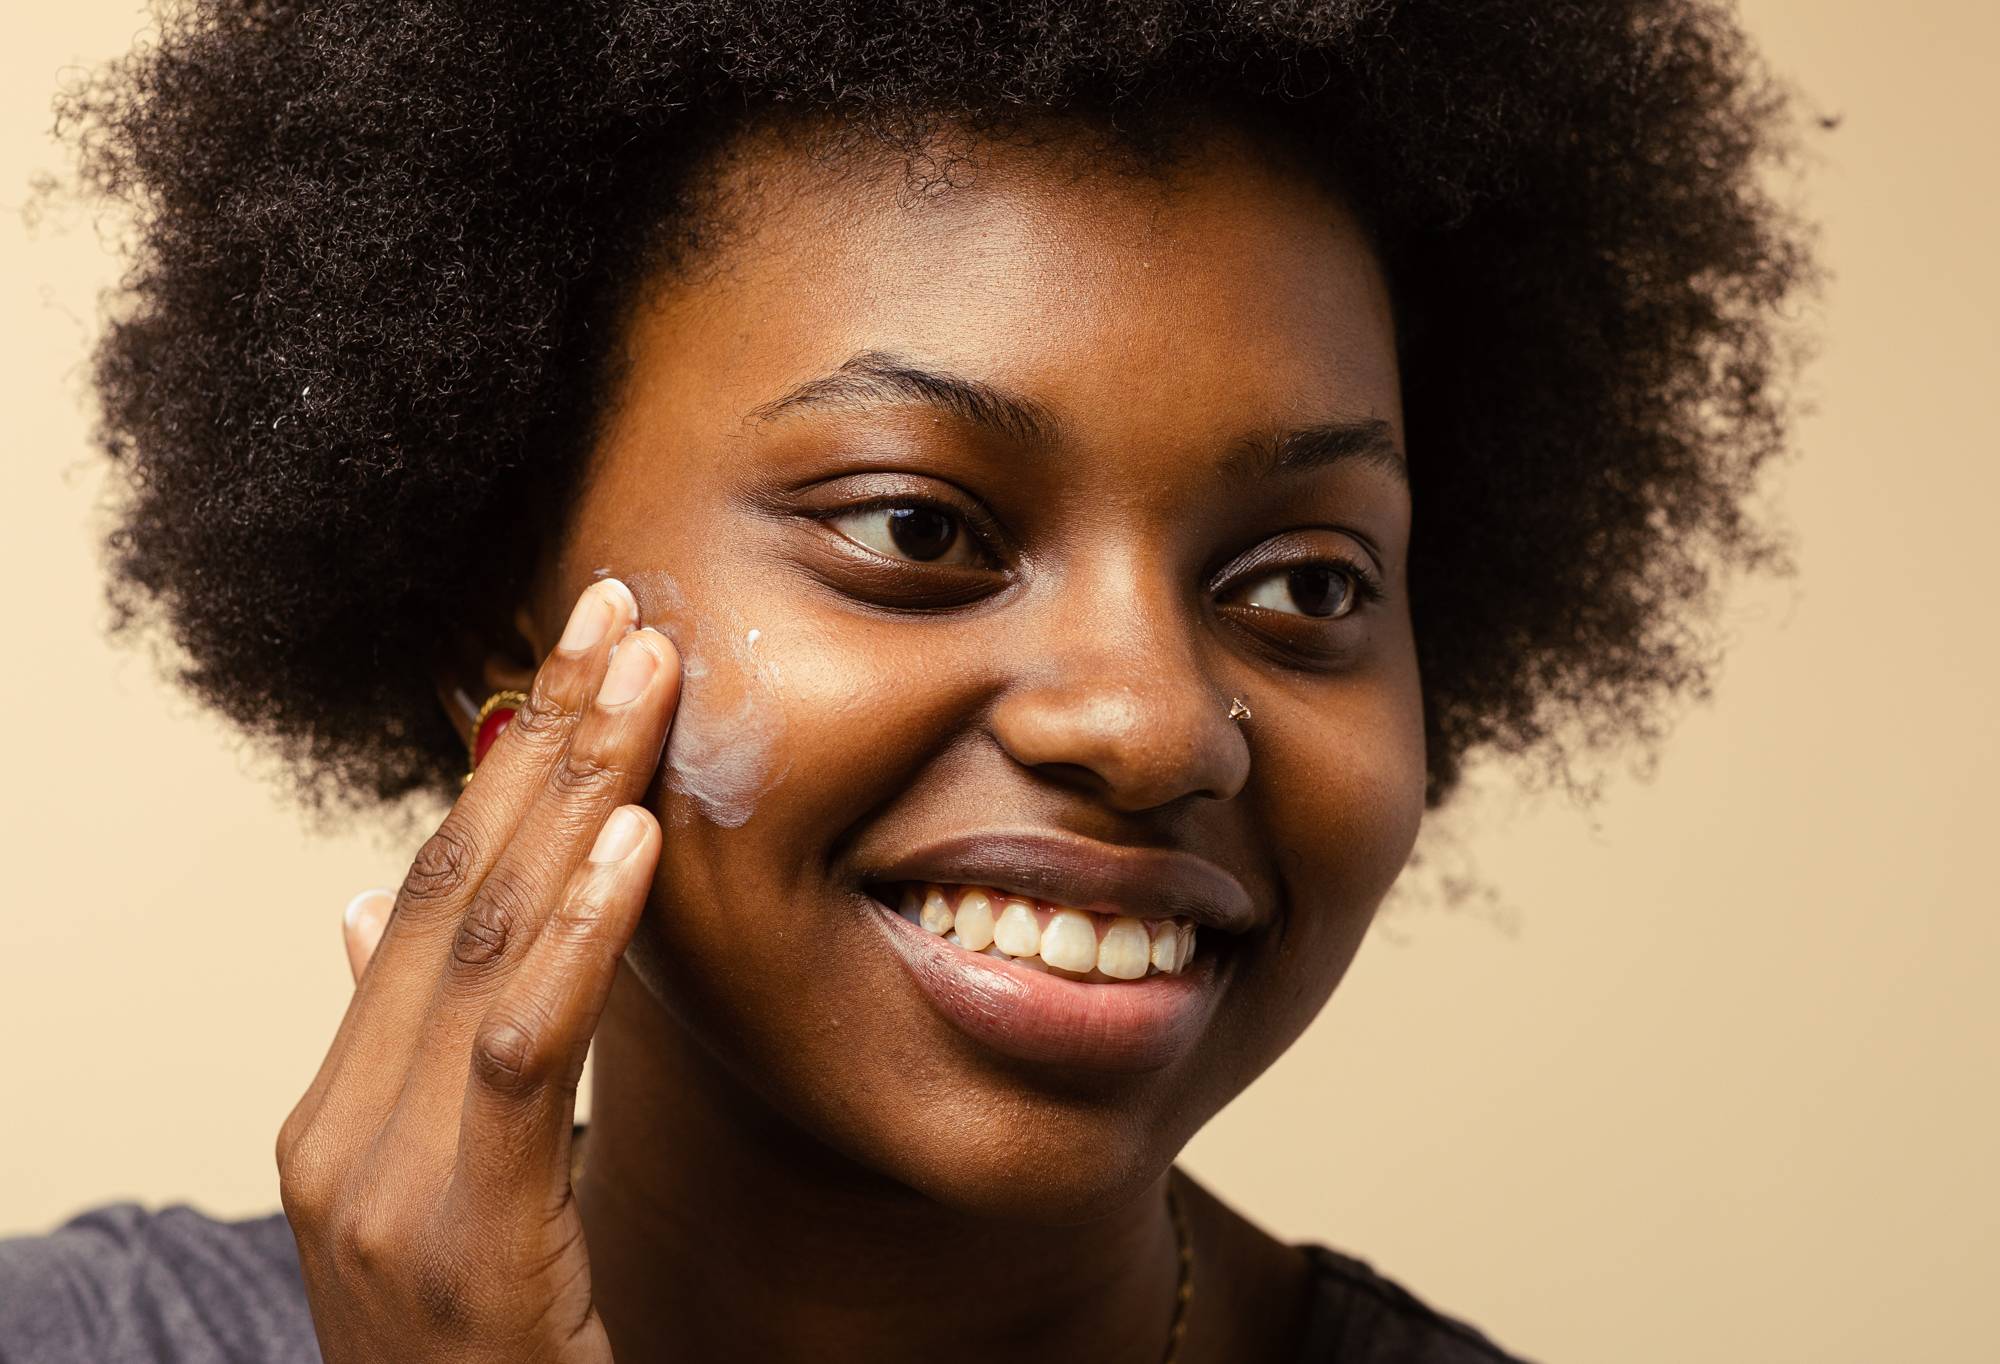 A person with coily, afro hair smiles as they rub a small patch of cream coloured Enzymion moisturiser into their cheek.